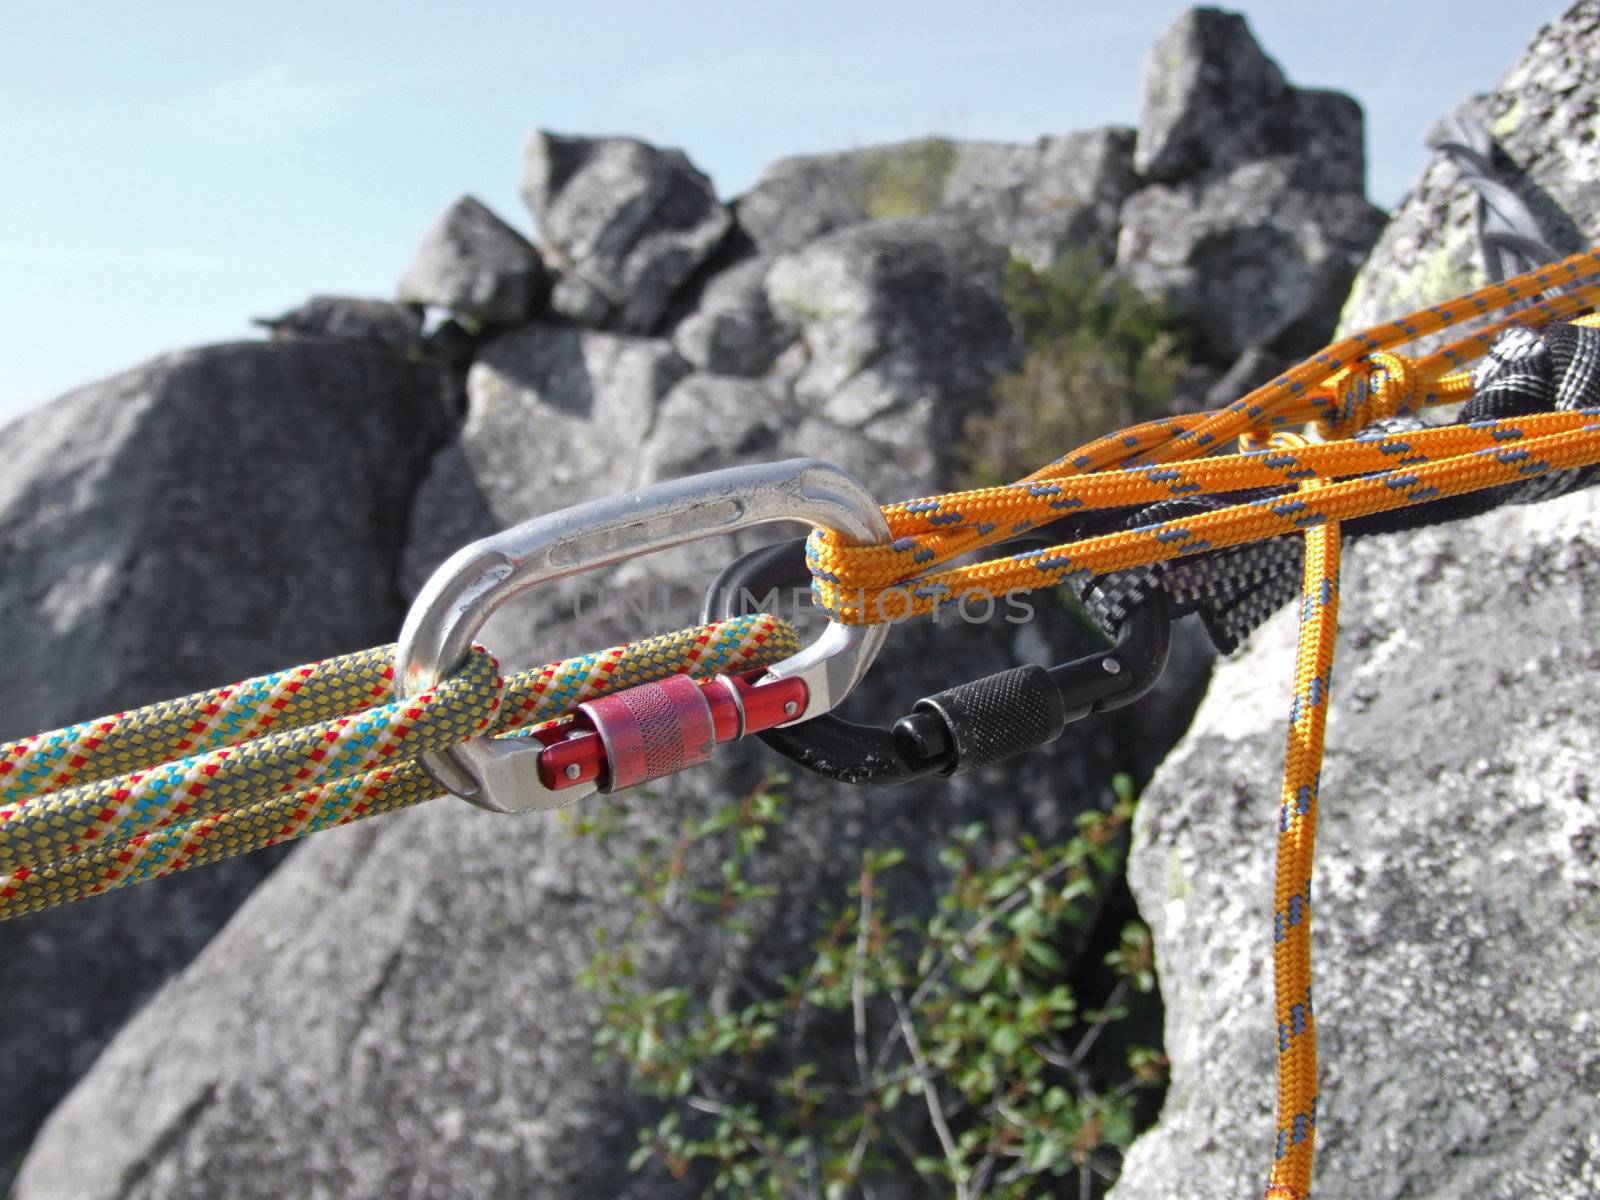 Equipment for mountain climbing and rappelling by PauloResende